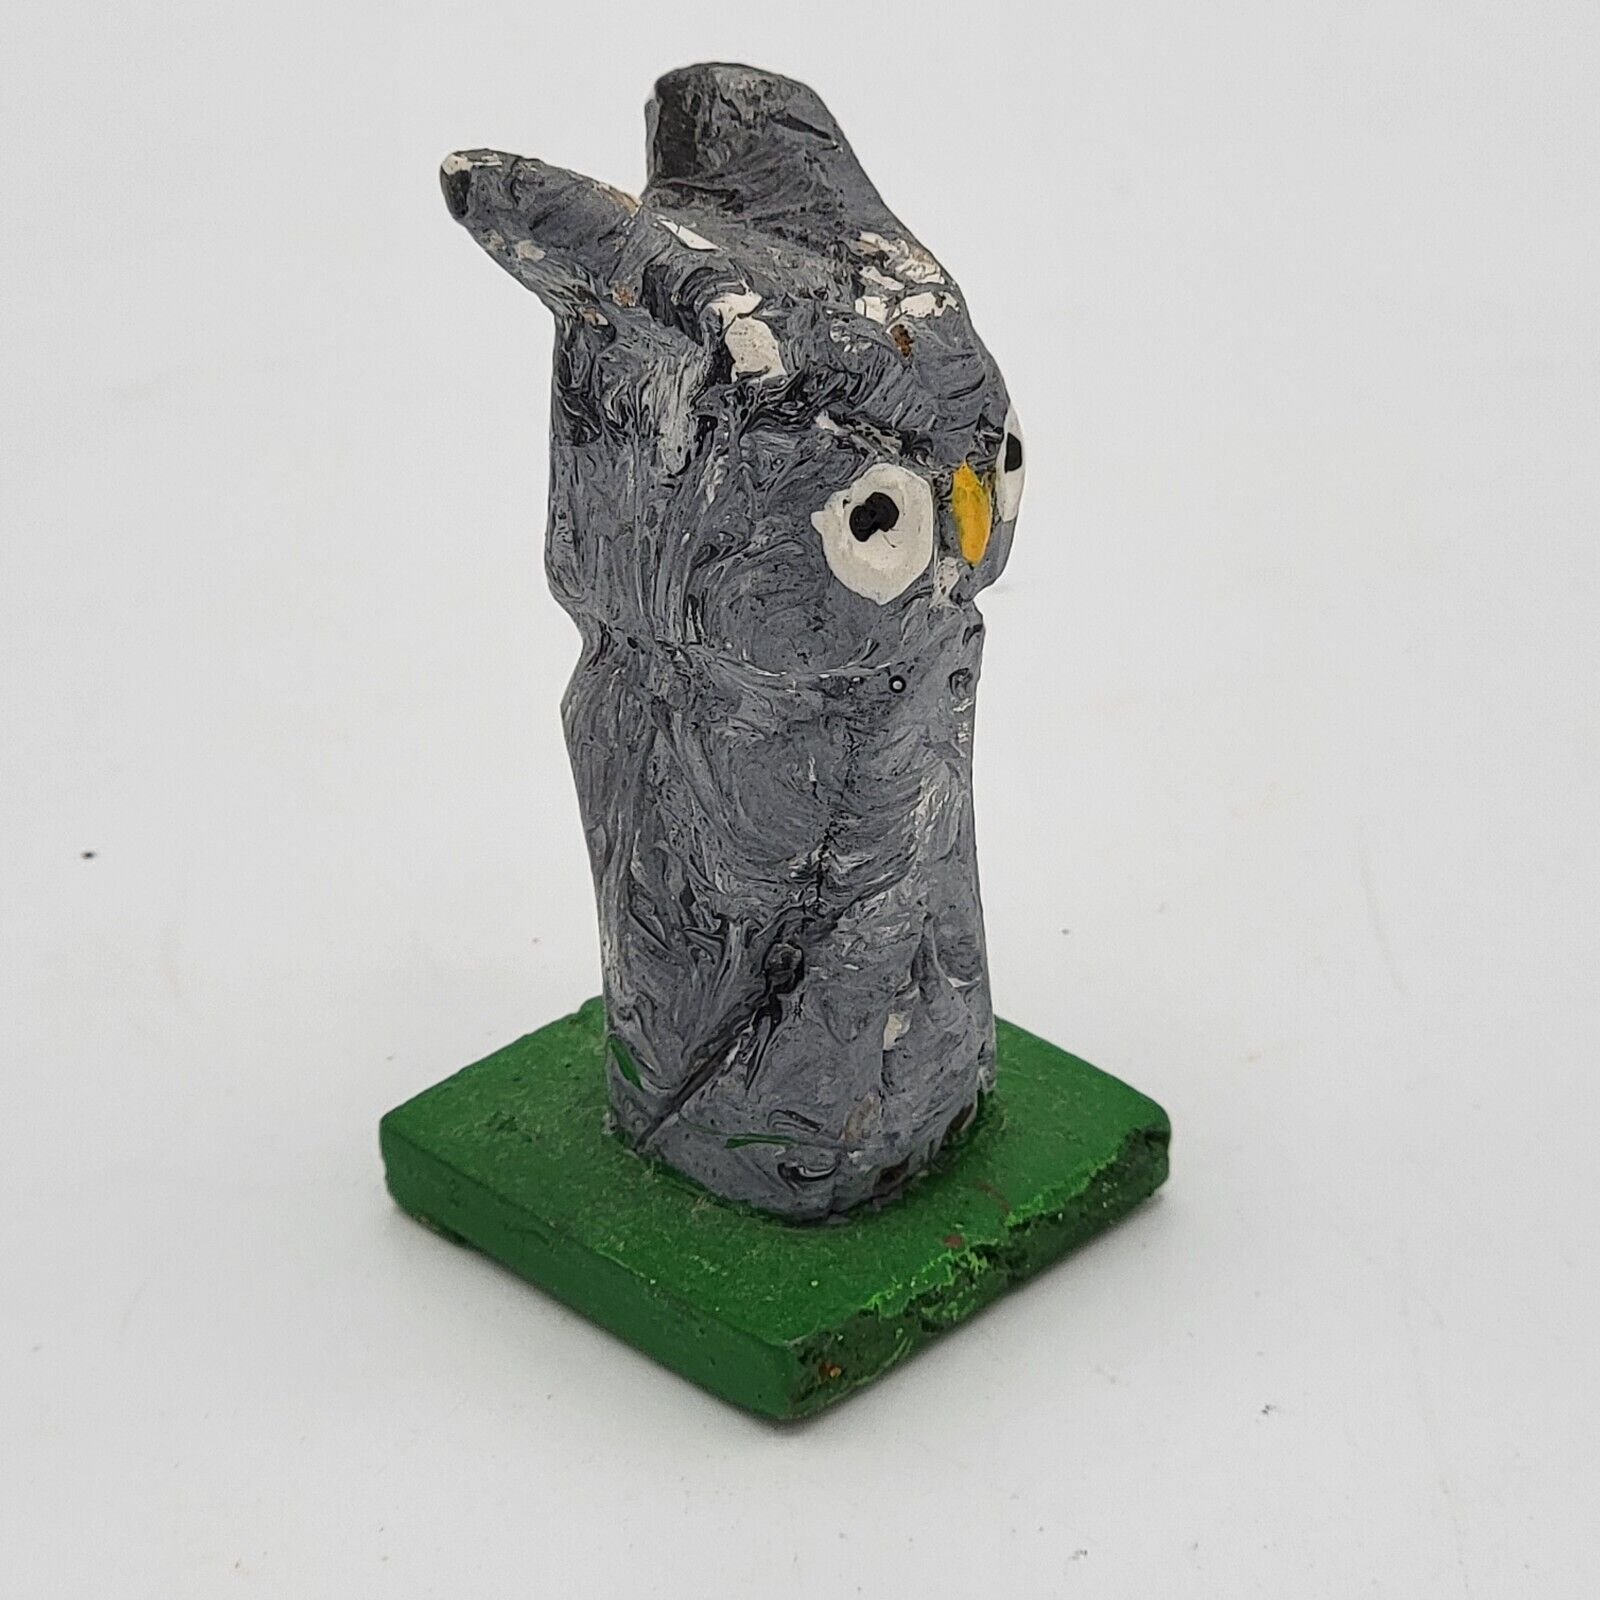 One Of A Kind Small Unique Hand Carved & Painted Wooden Owl Figurine on a Base